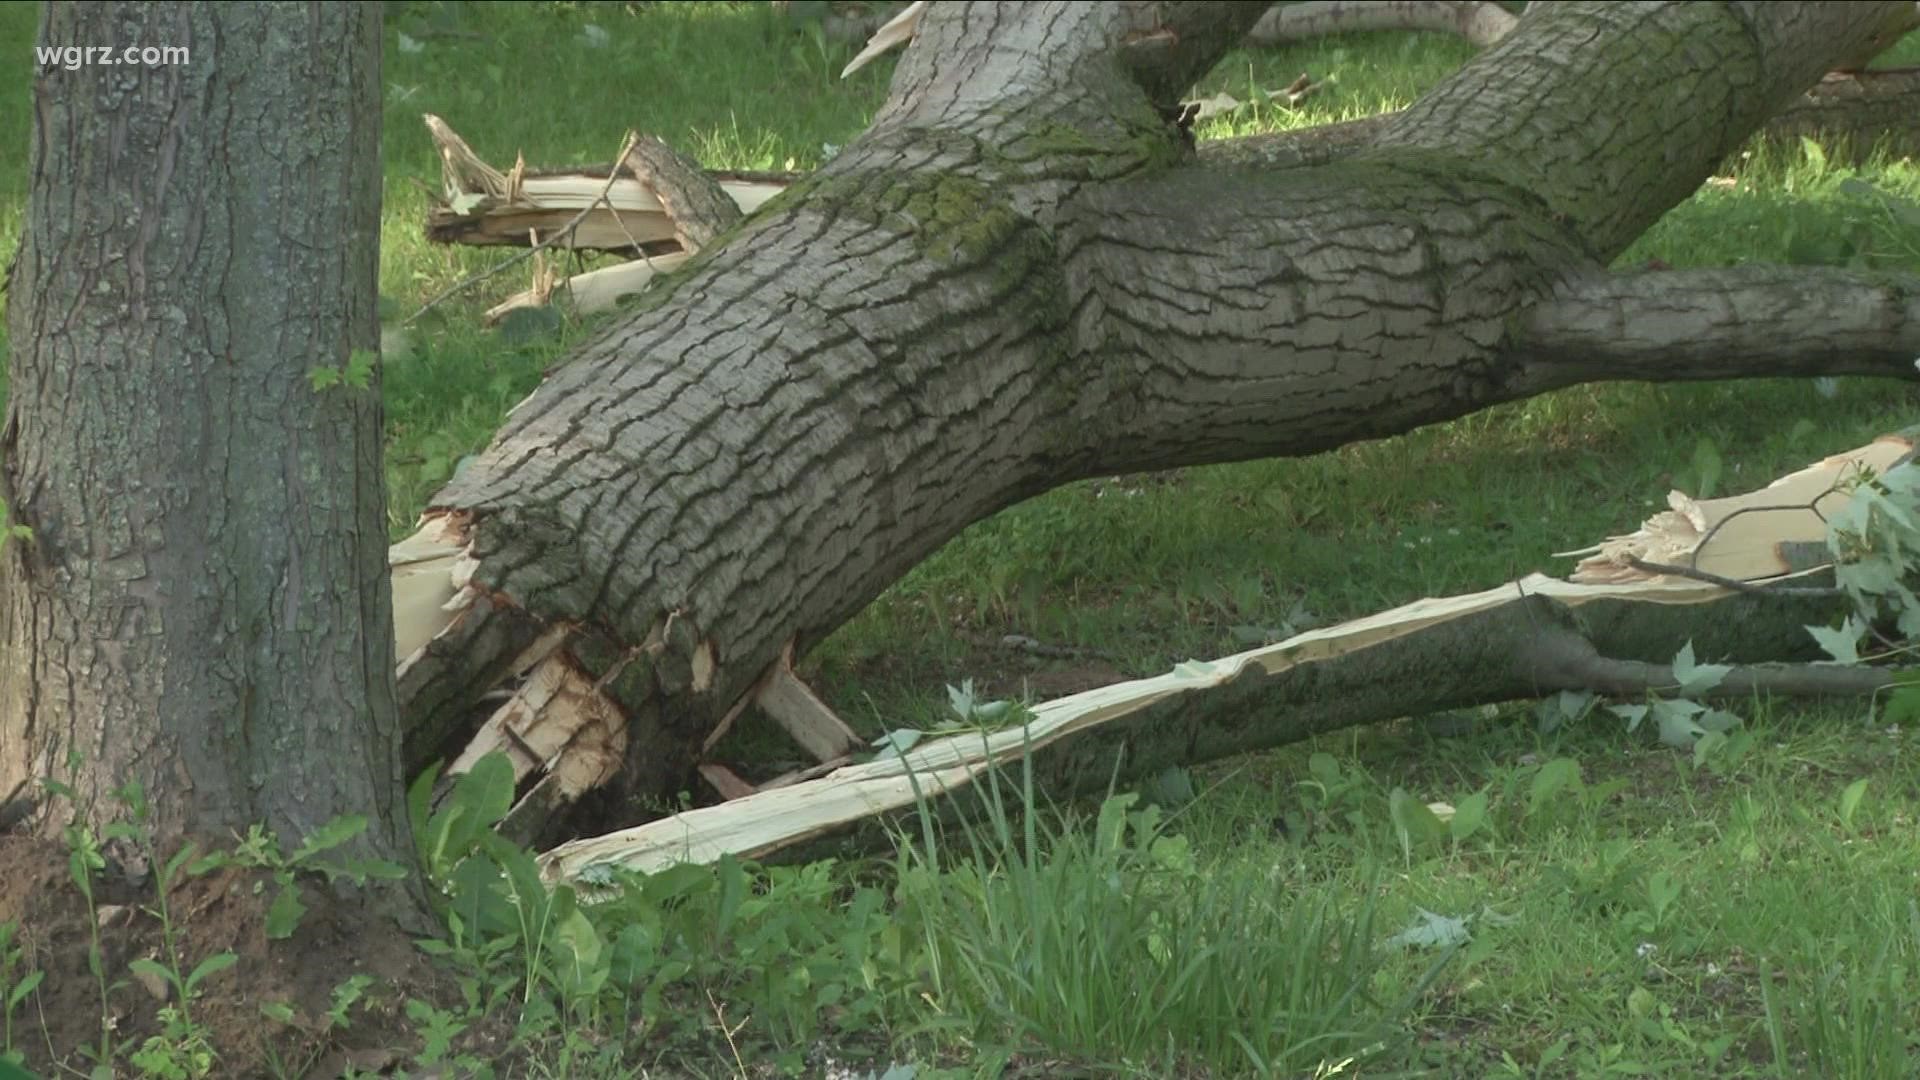 Niagara County was one of the areas hit hard by powerful storms. Leaving trees down, power outages and other damage, with crews continuing to clean up.